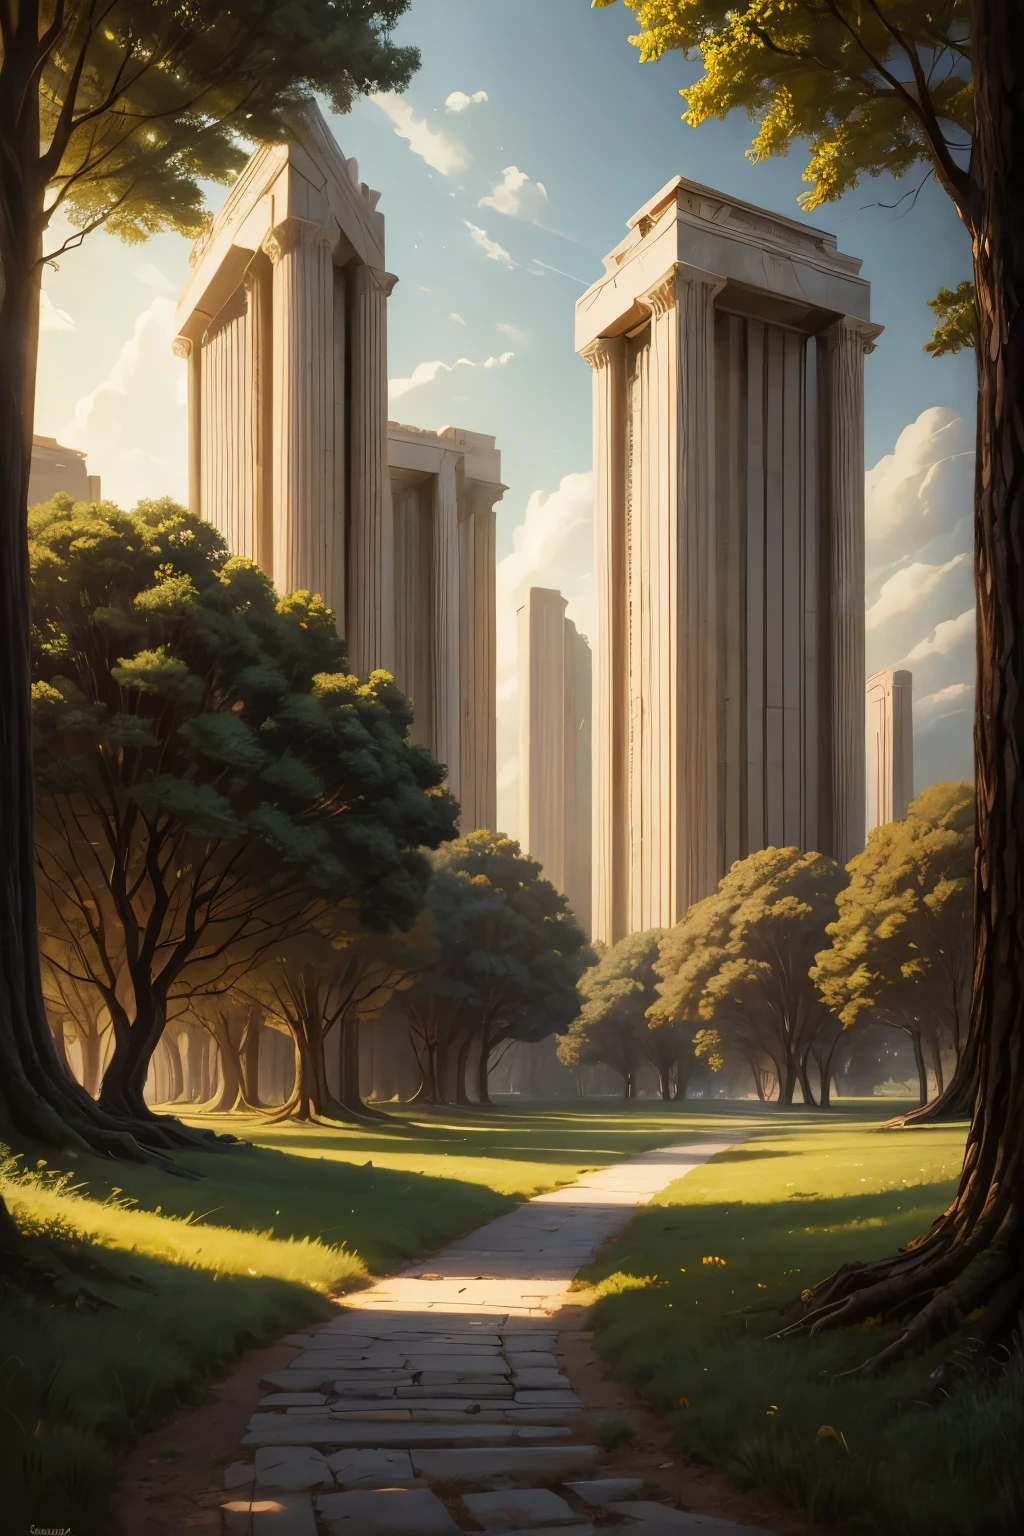 Ralph-McQuarrie-Stil, greek architecture done in a sci-fi style on a Schön forest and meadow scene with tall buildings and open green spaces, Ölgemälde, Schön, sehr detailliert